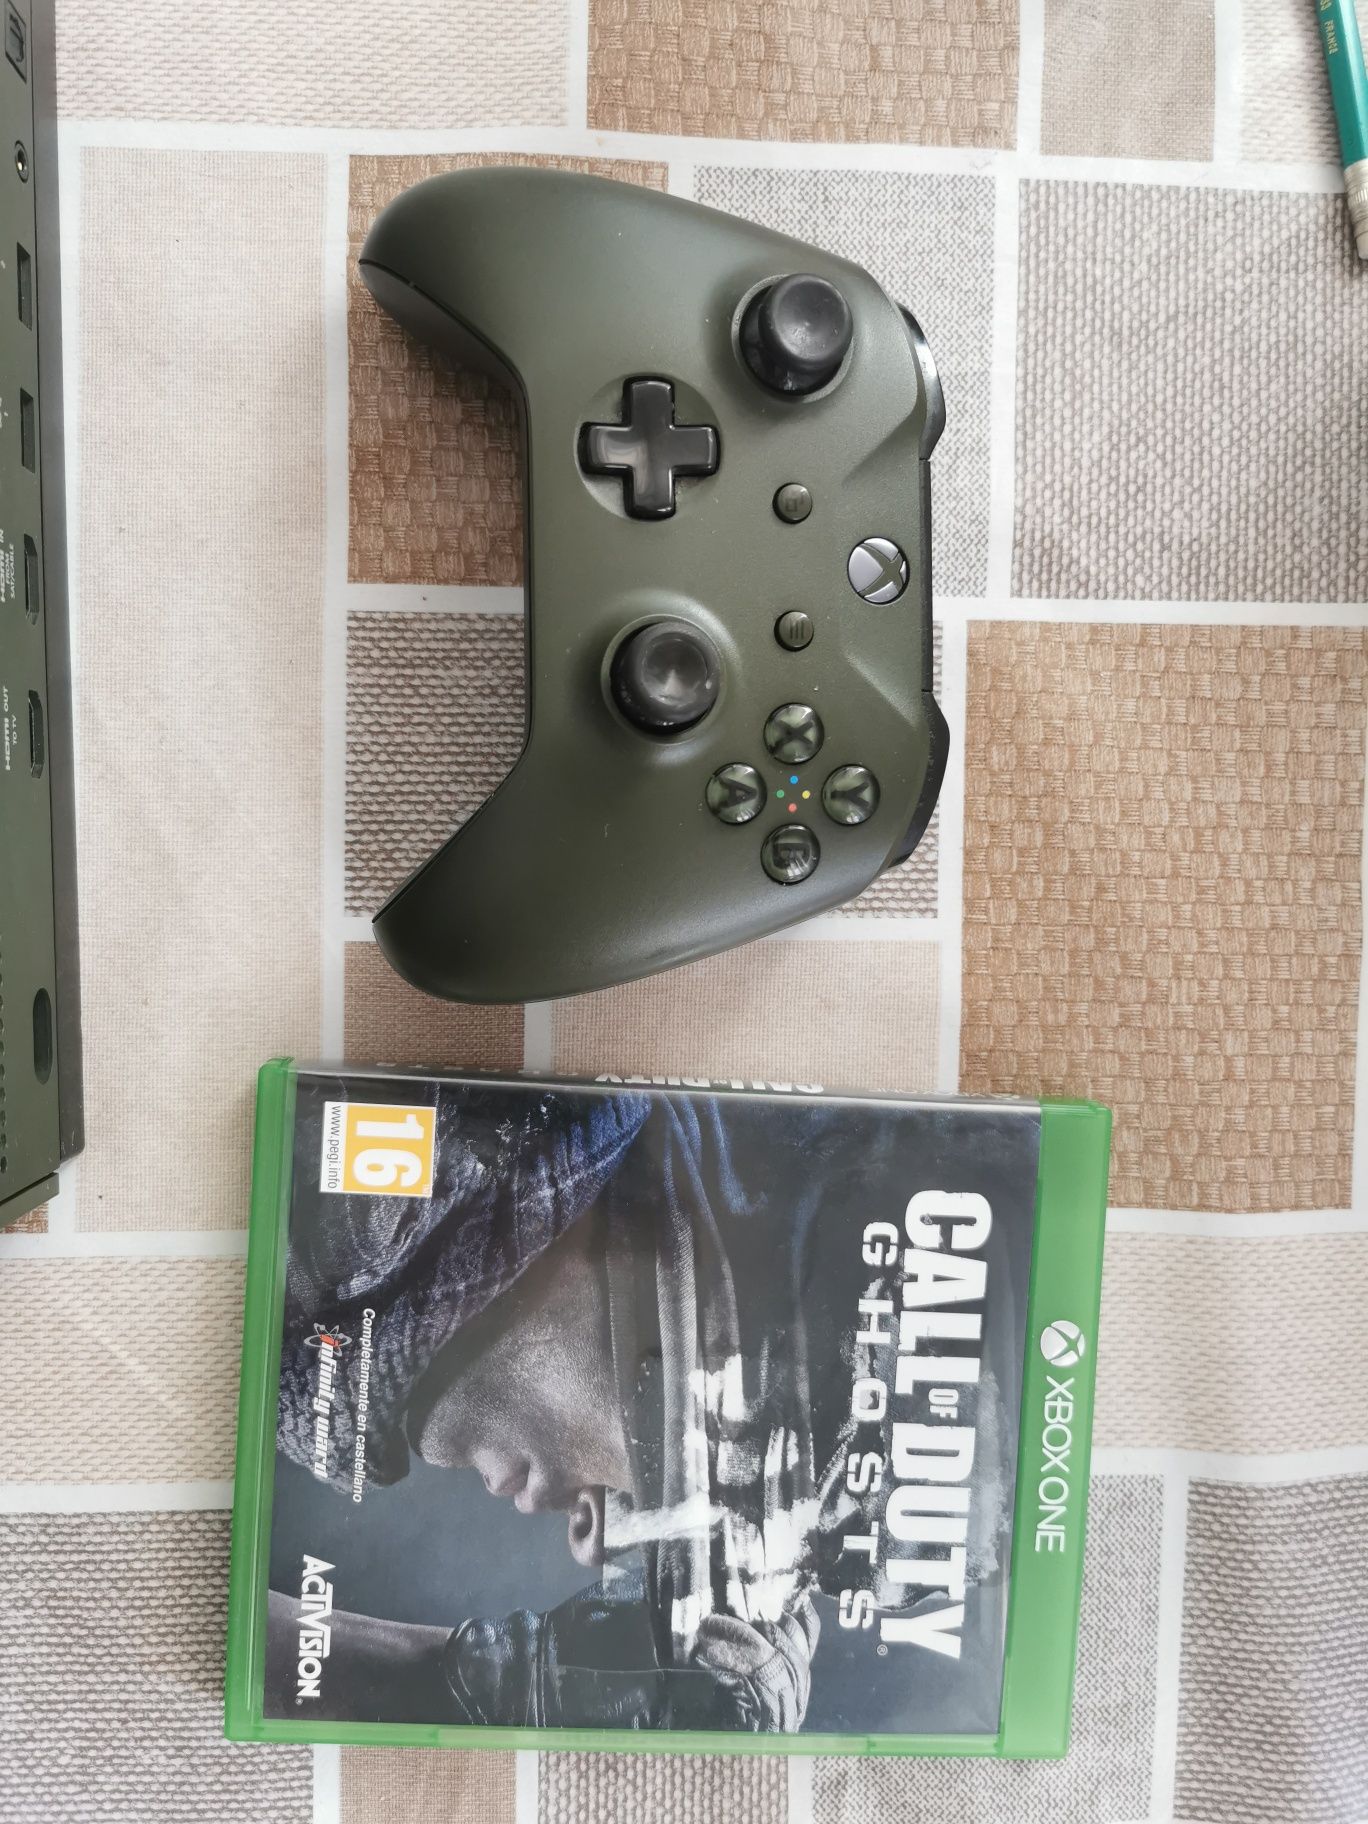 Xbox one s "military green"